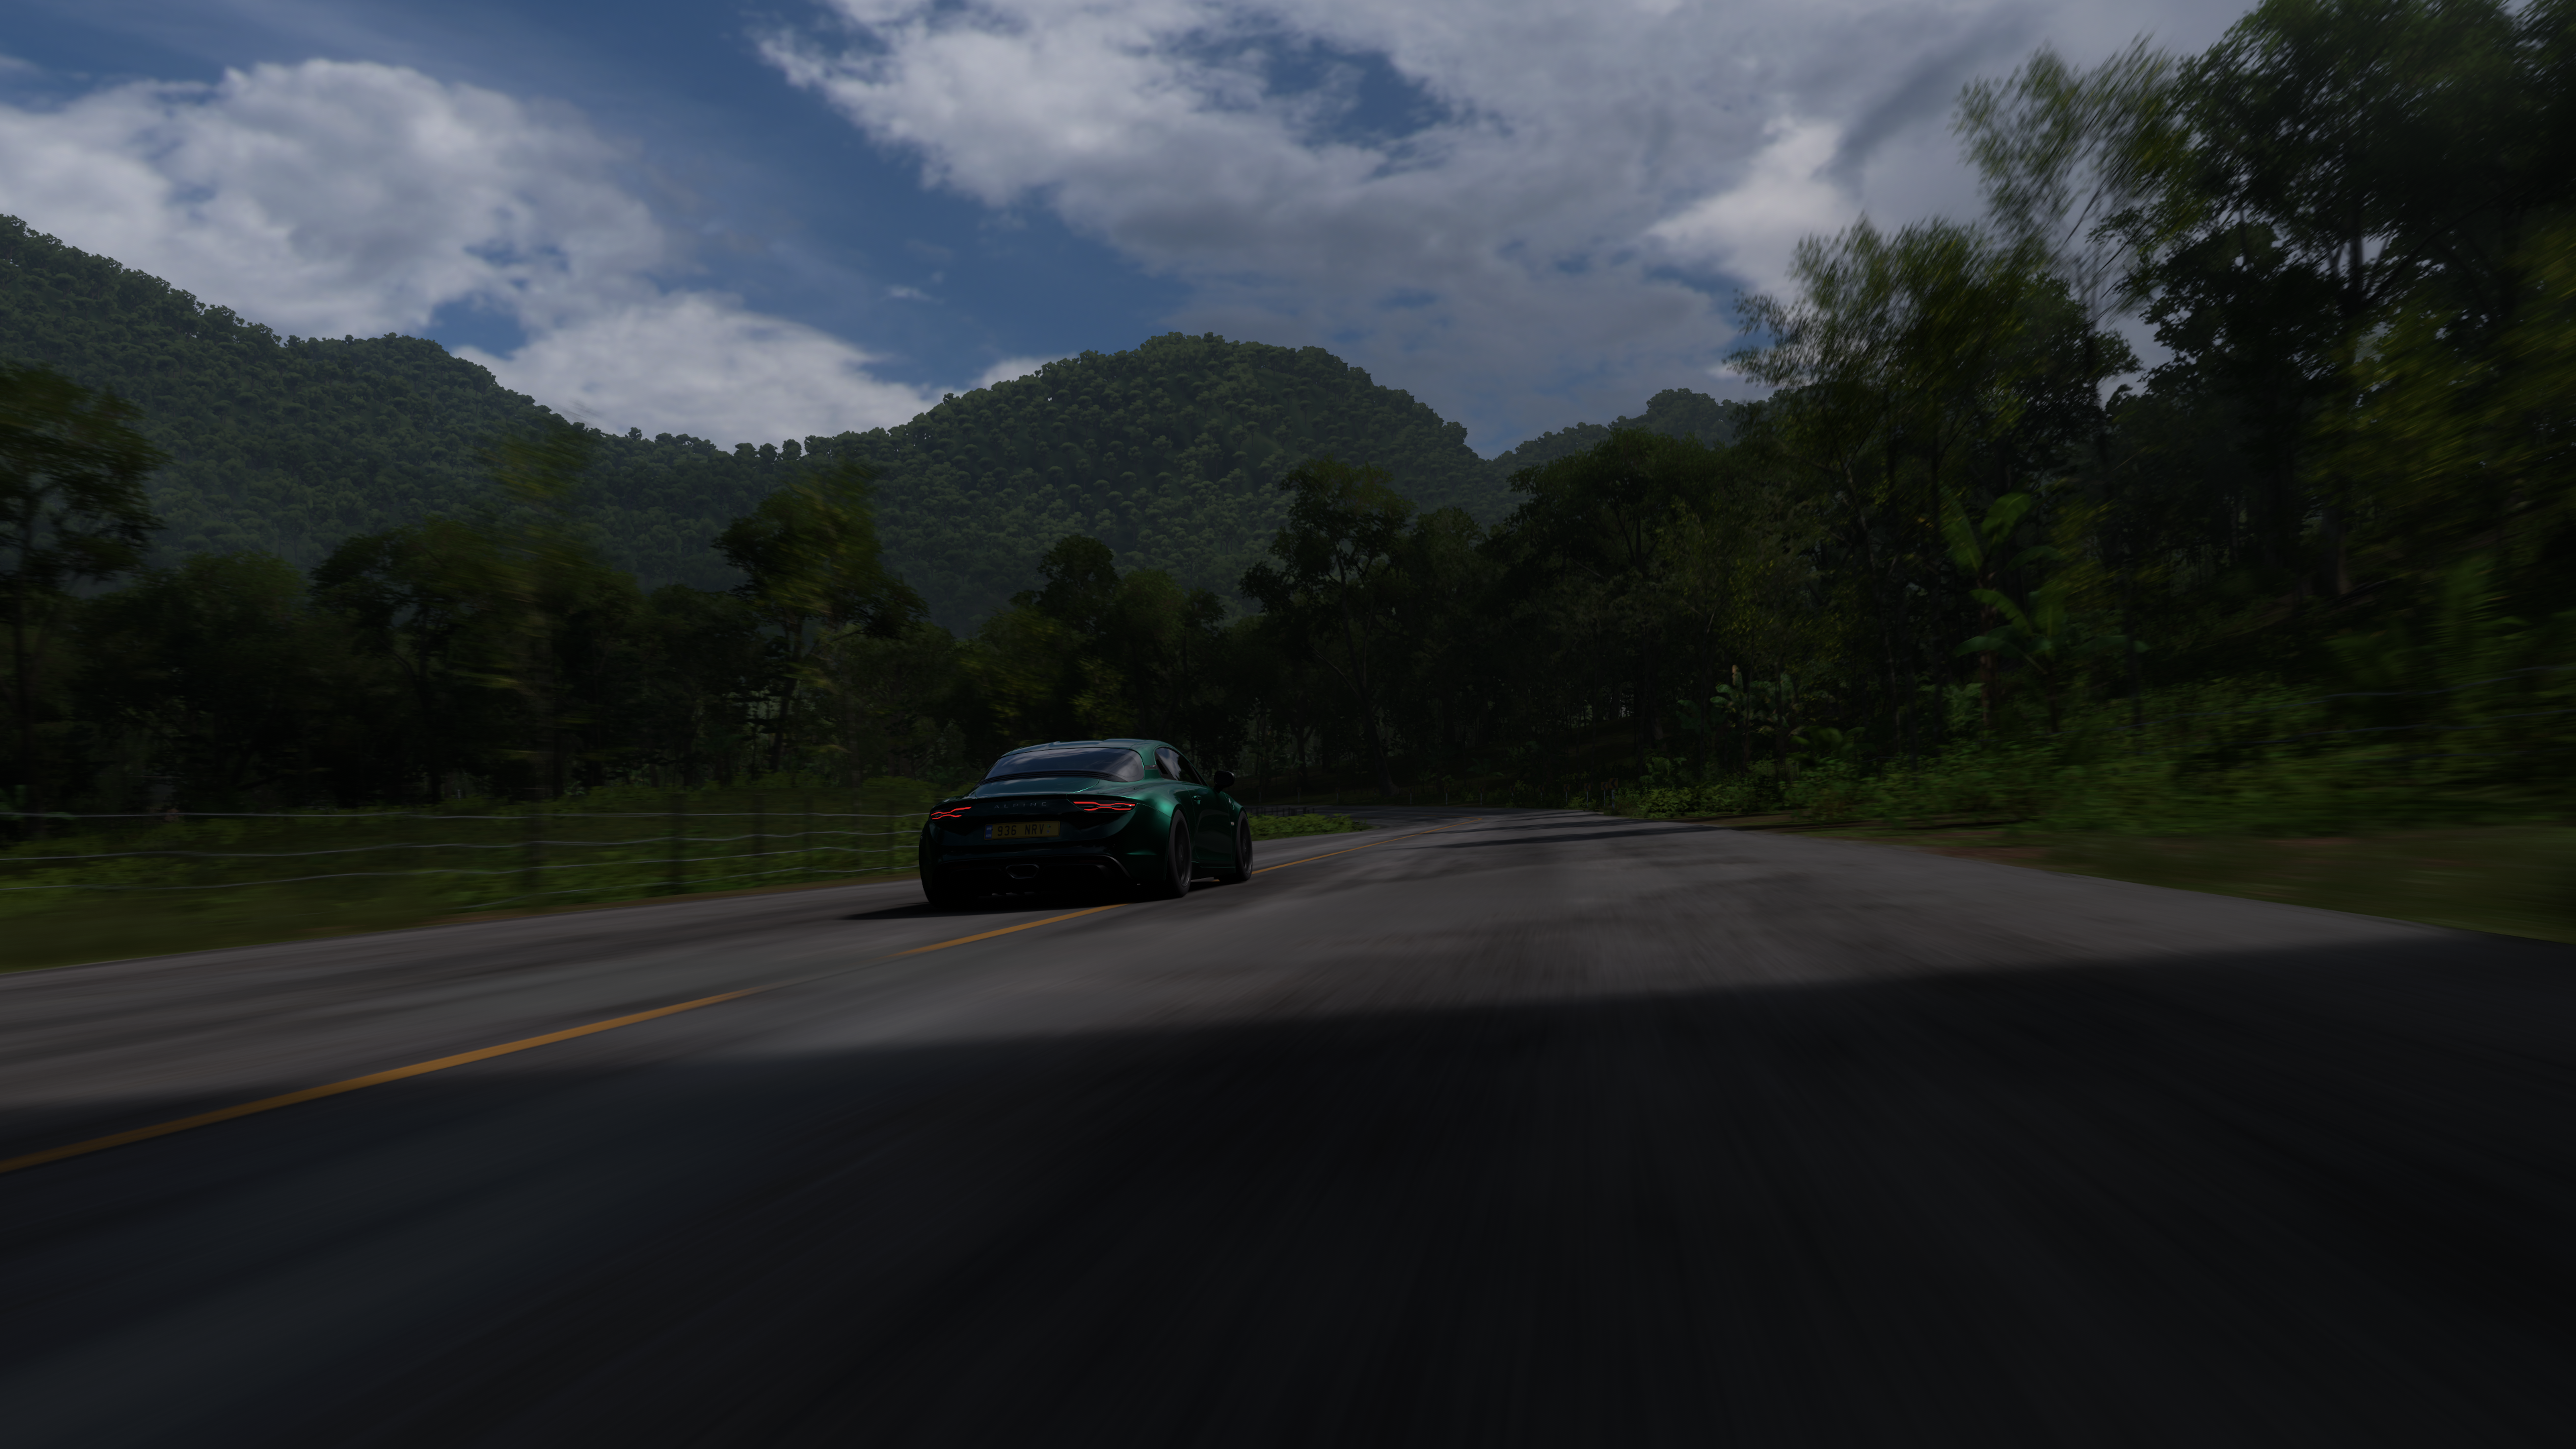 Forza Horizon 5 Car Sports Car Alpine A110 Forest Video Games CGi Road Mountains Clouds Renault Alpi 3840x2160